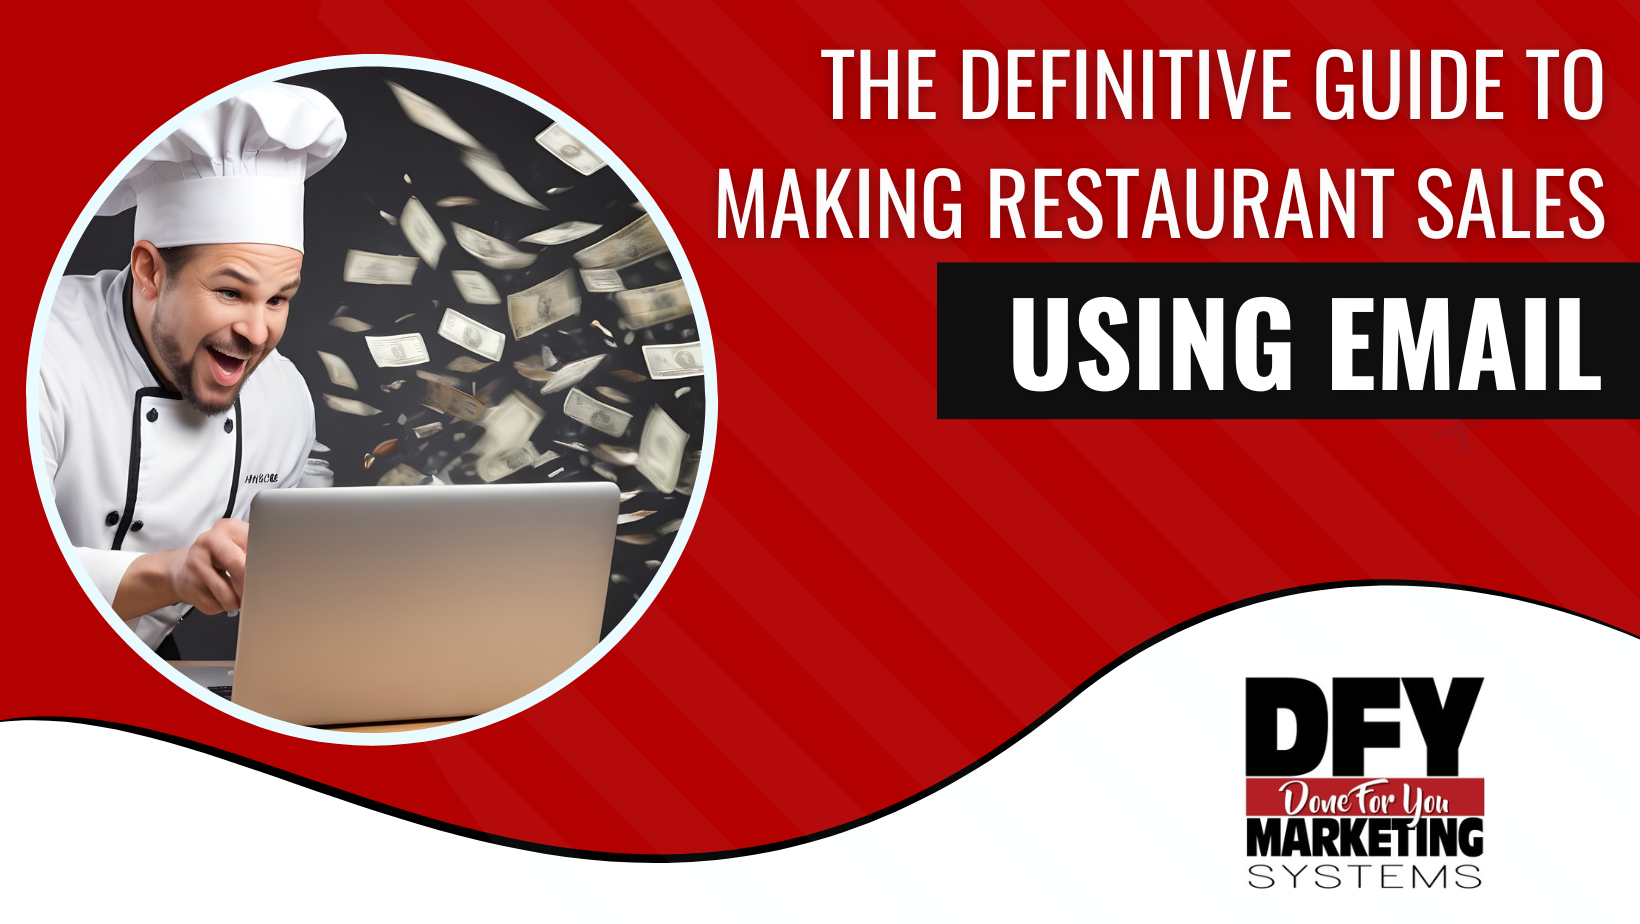 The Definitive Guide To Making Restaurant Sales Using Email